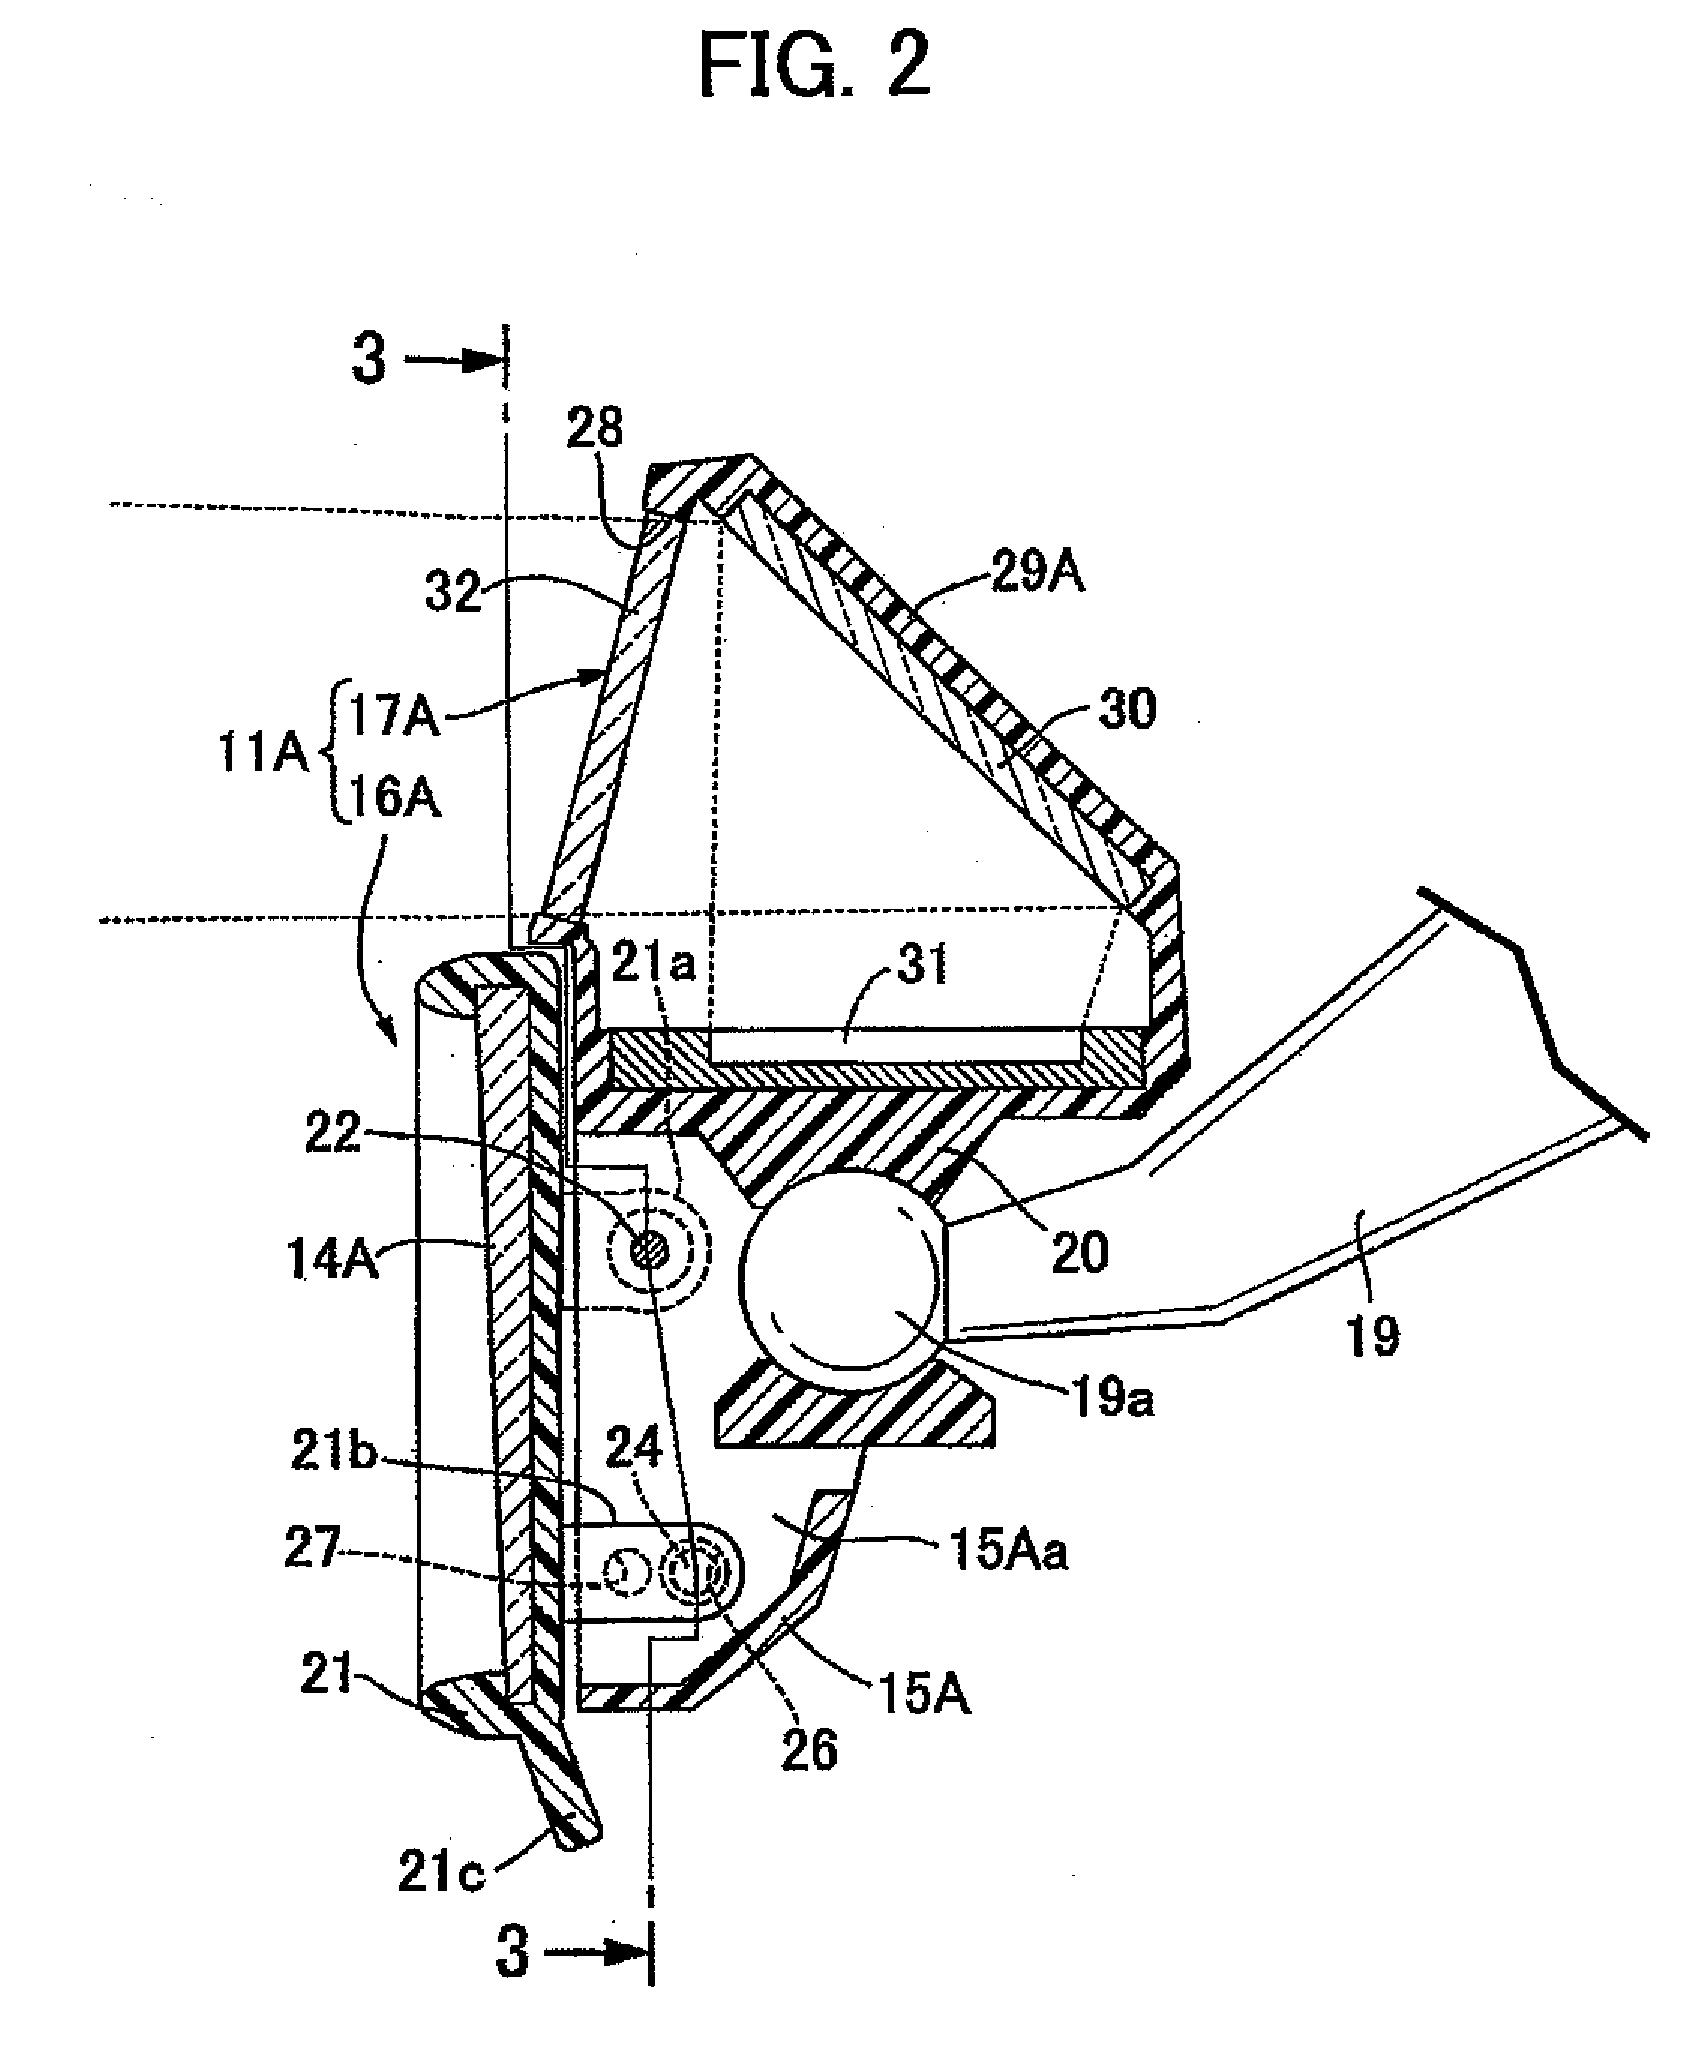 Rear-view mirror system with display device